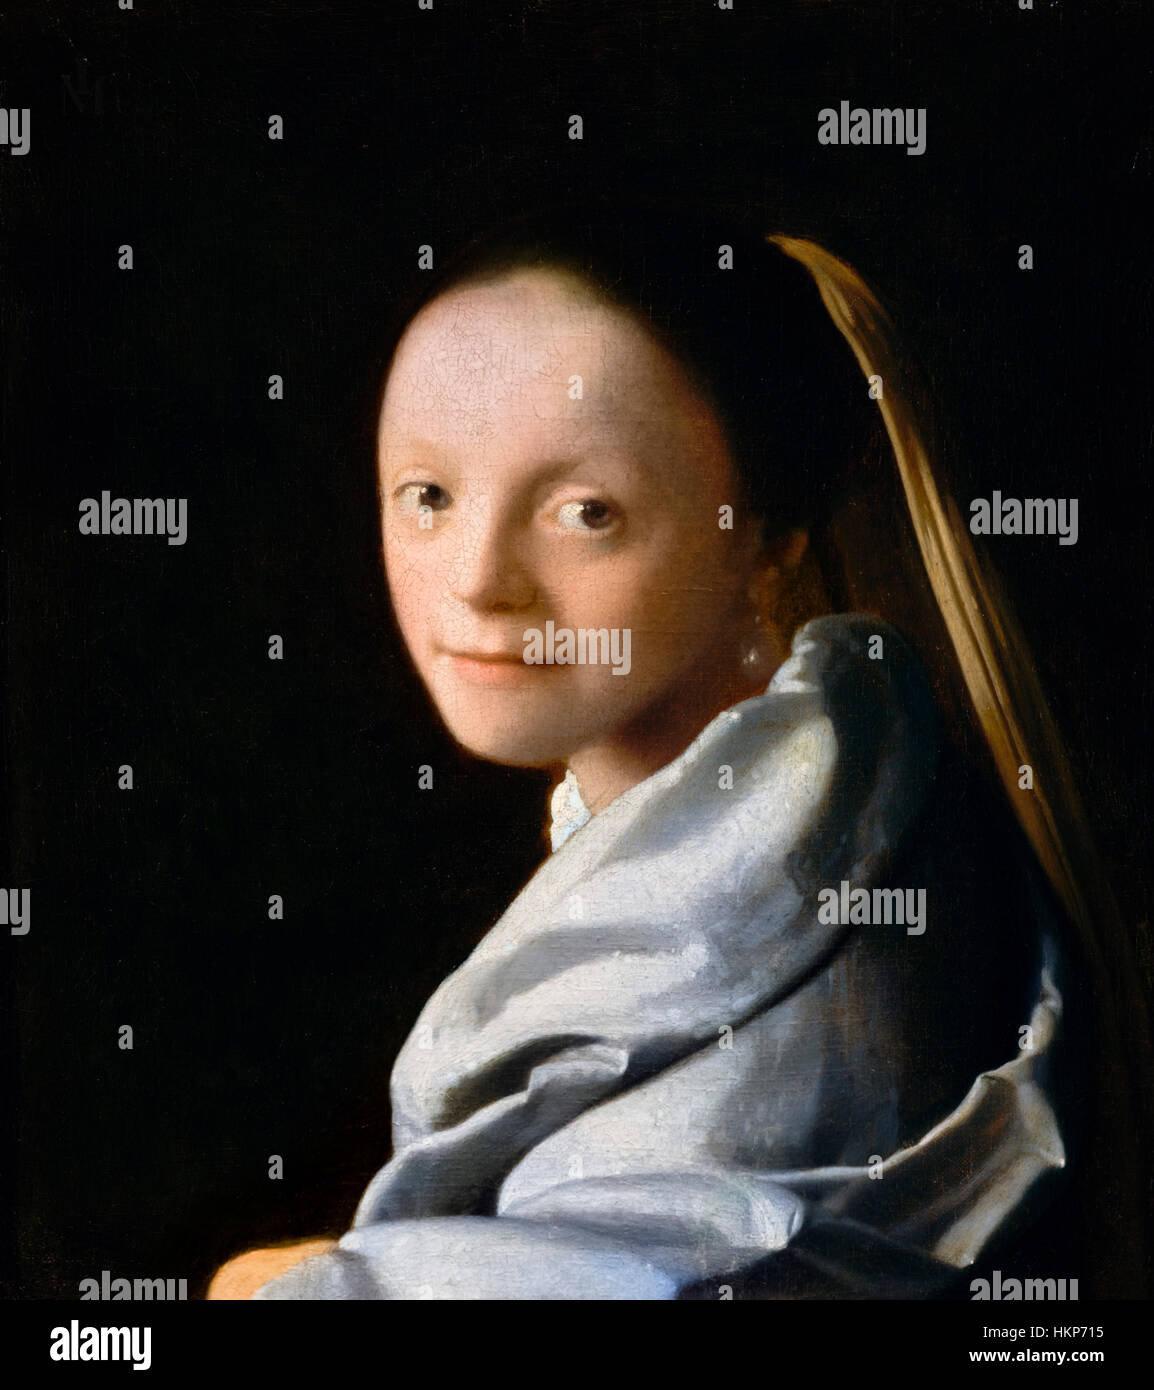 Vermeer. 'Study of a Young Woman' by Johannes Vermeer, oil on canvas, c.1665. Stock Photo